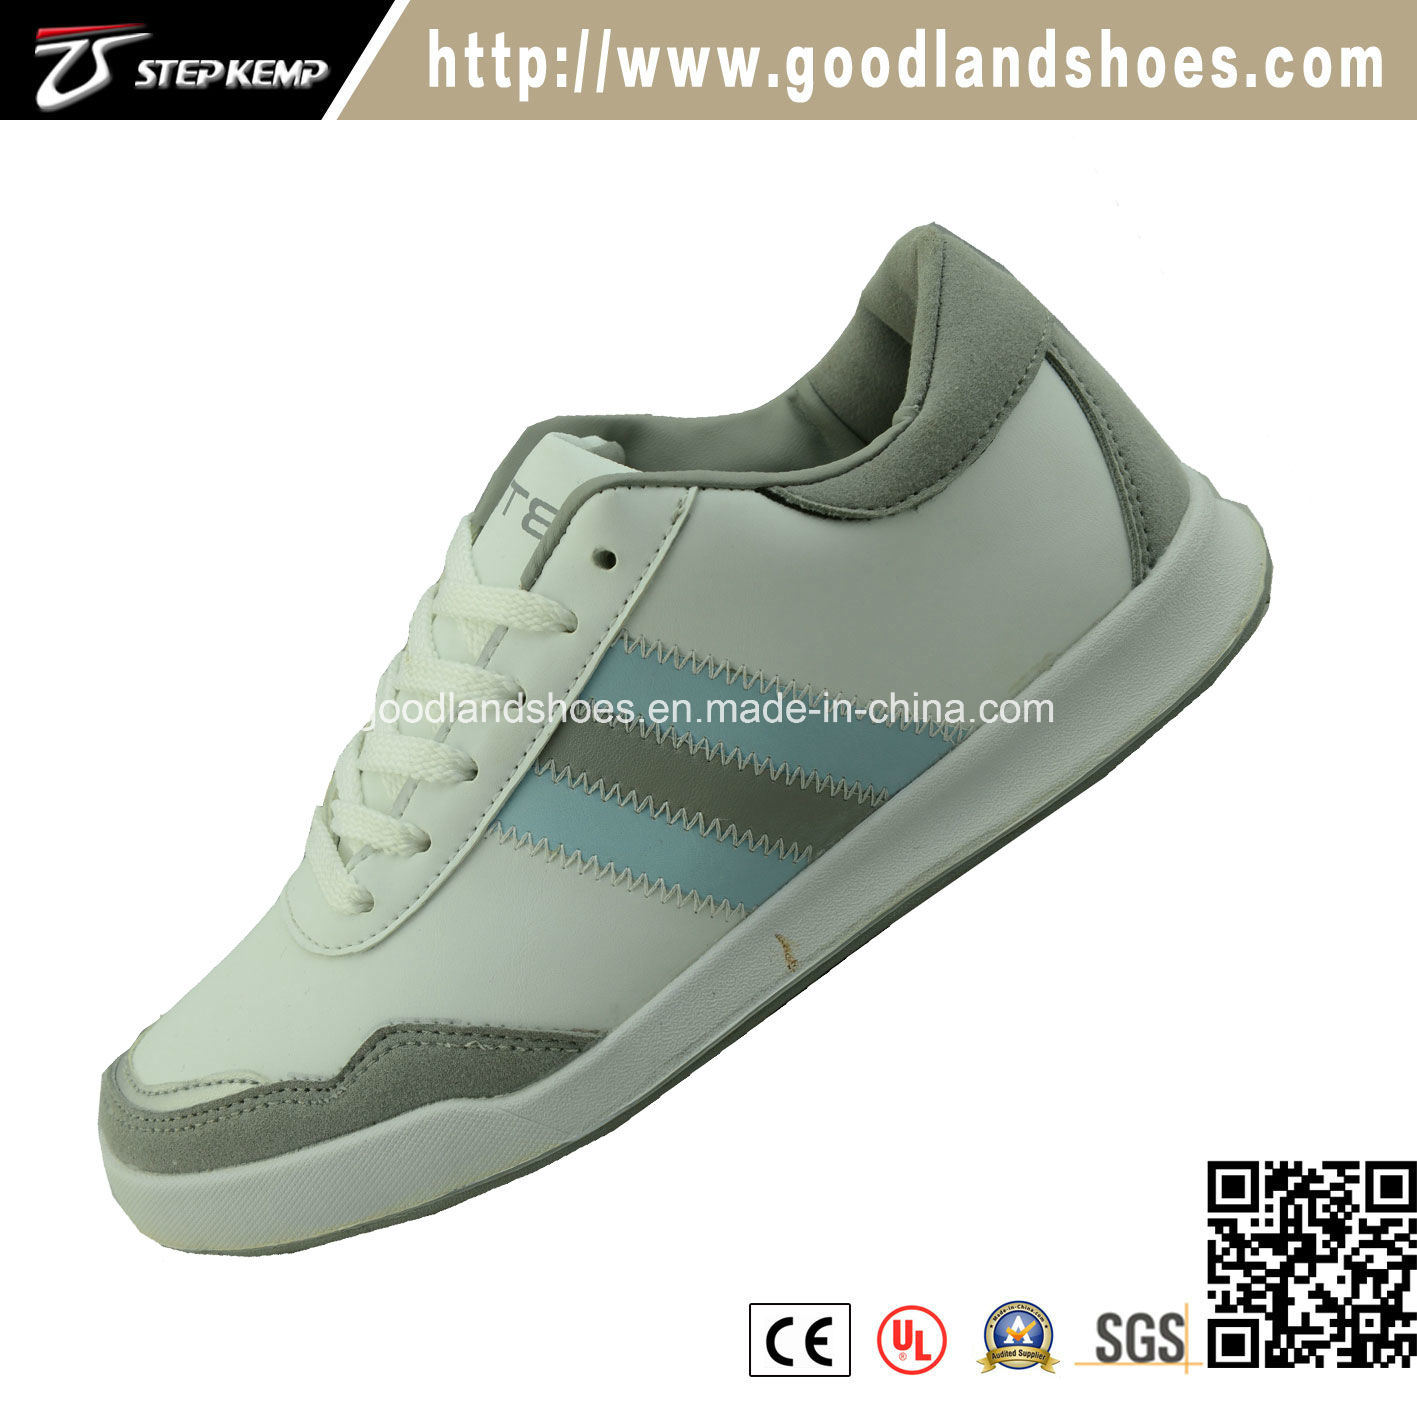 New High Quality Skate Shoes Casual Shoes for Men and Women 20238-2